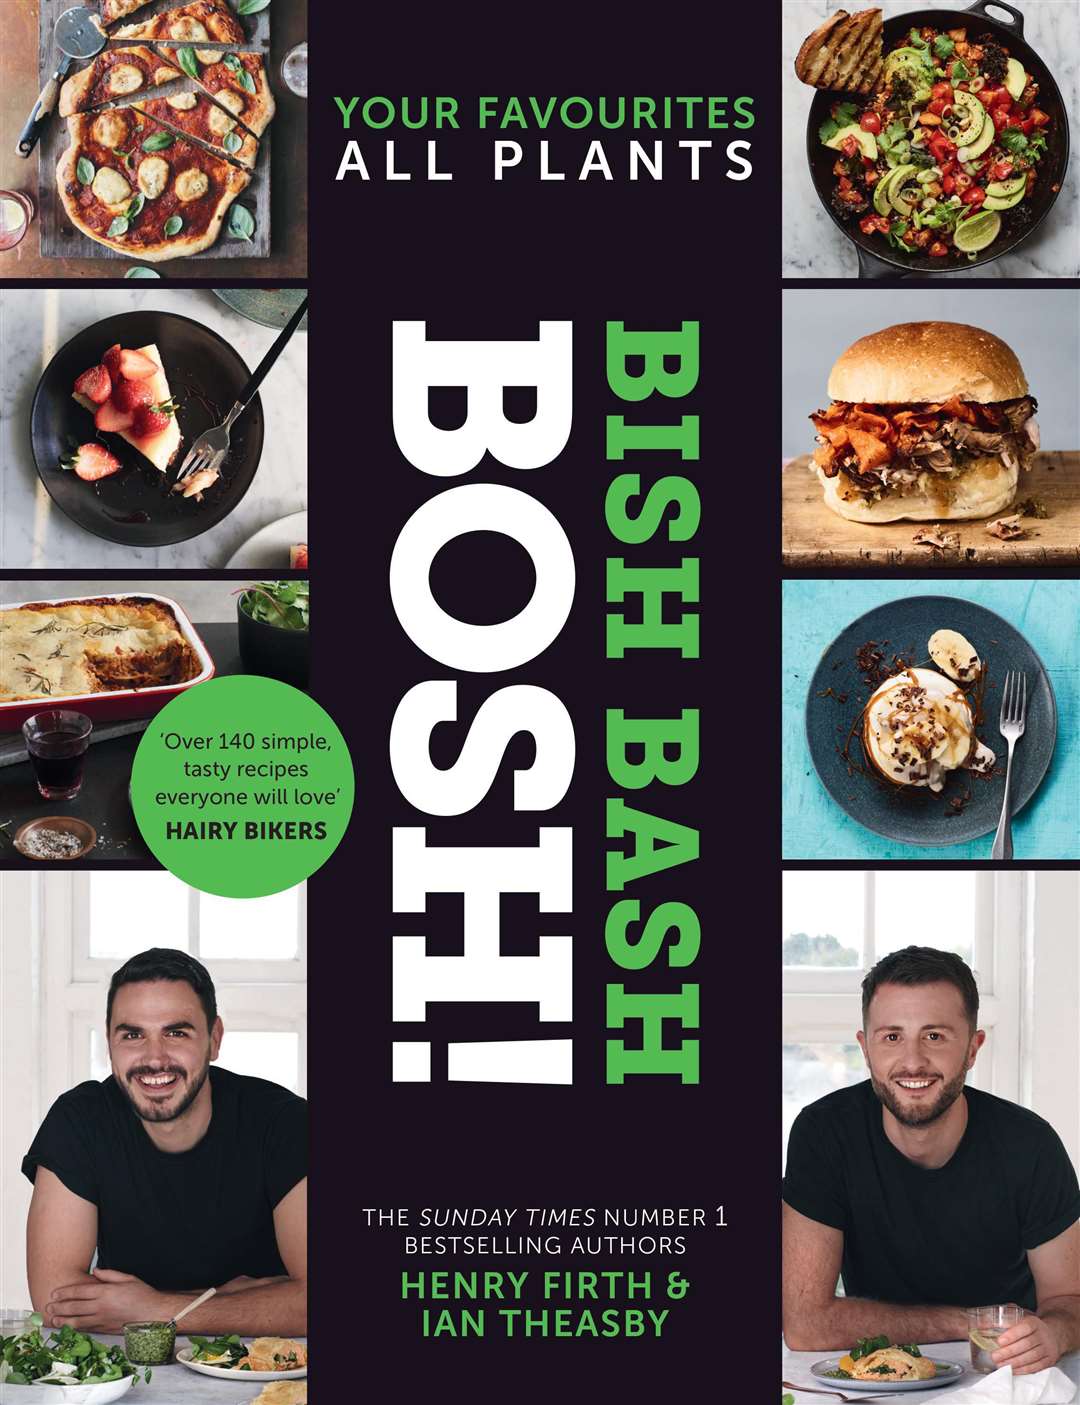 Bish Bash Bosh! by Henry Firth and Ian Theasby.